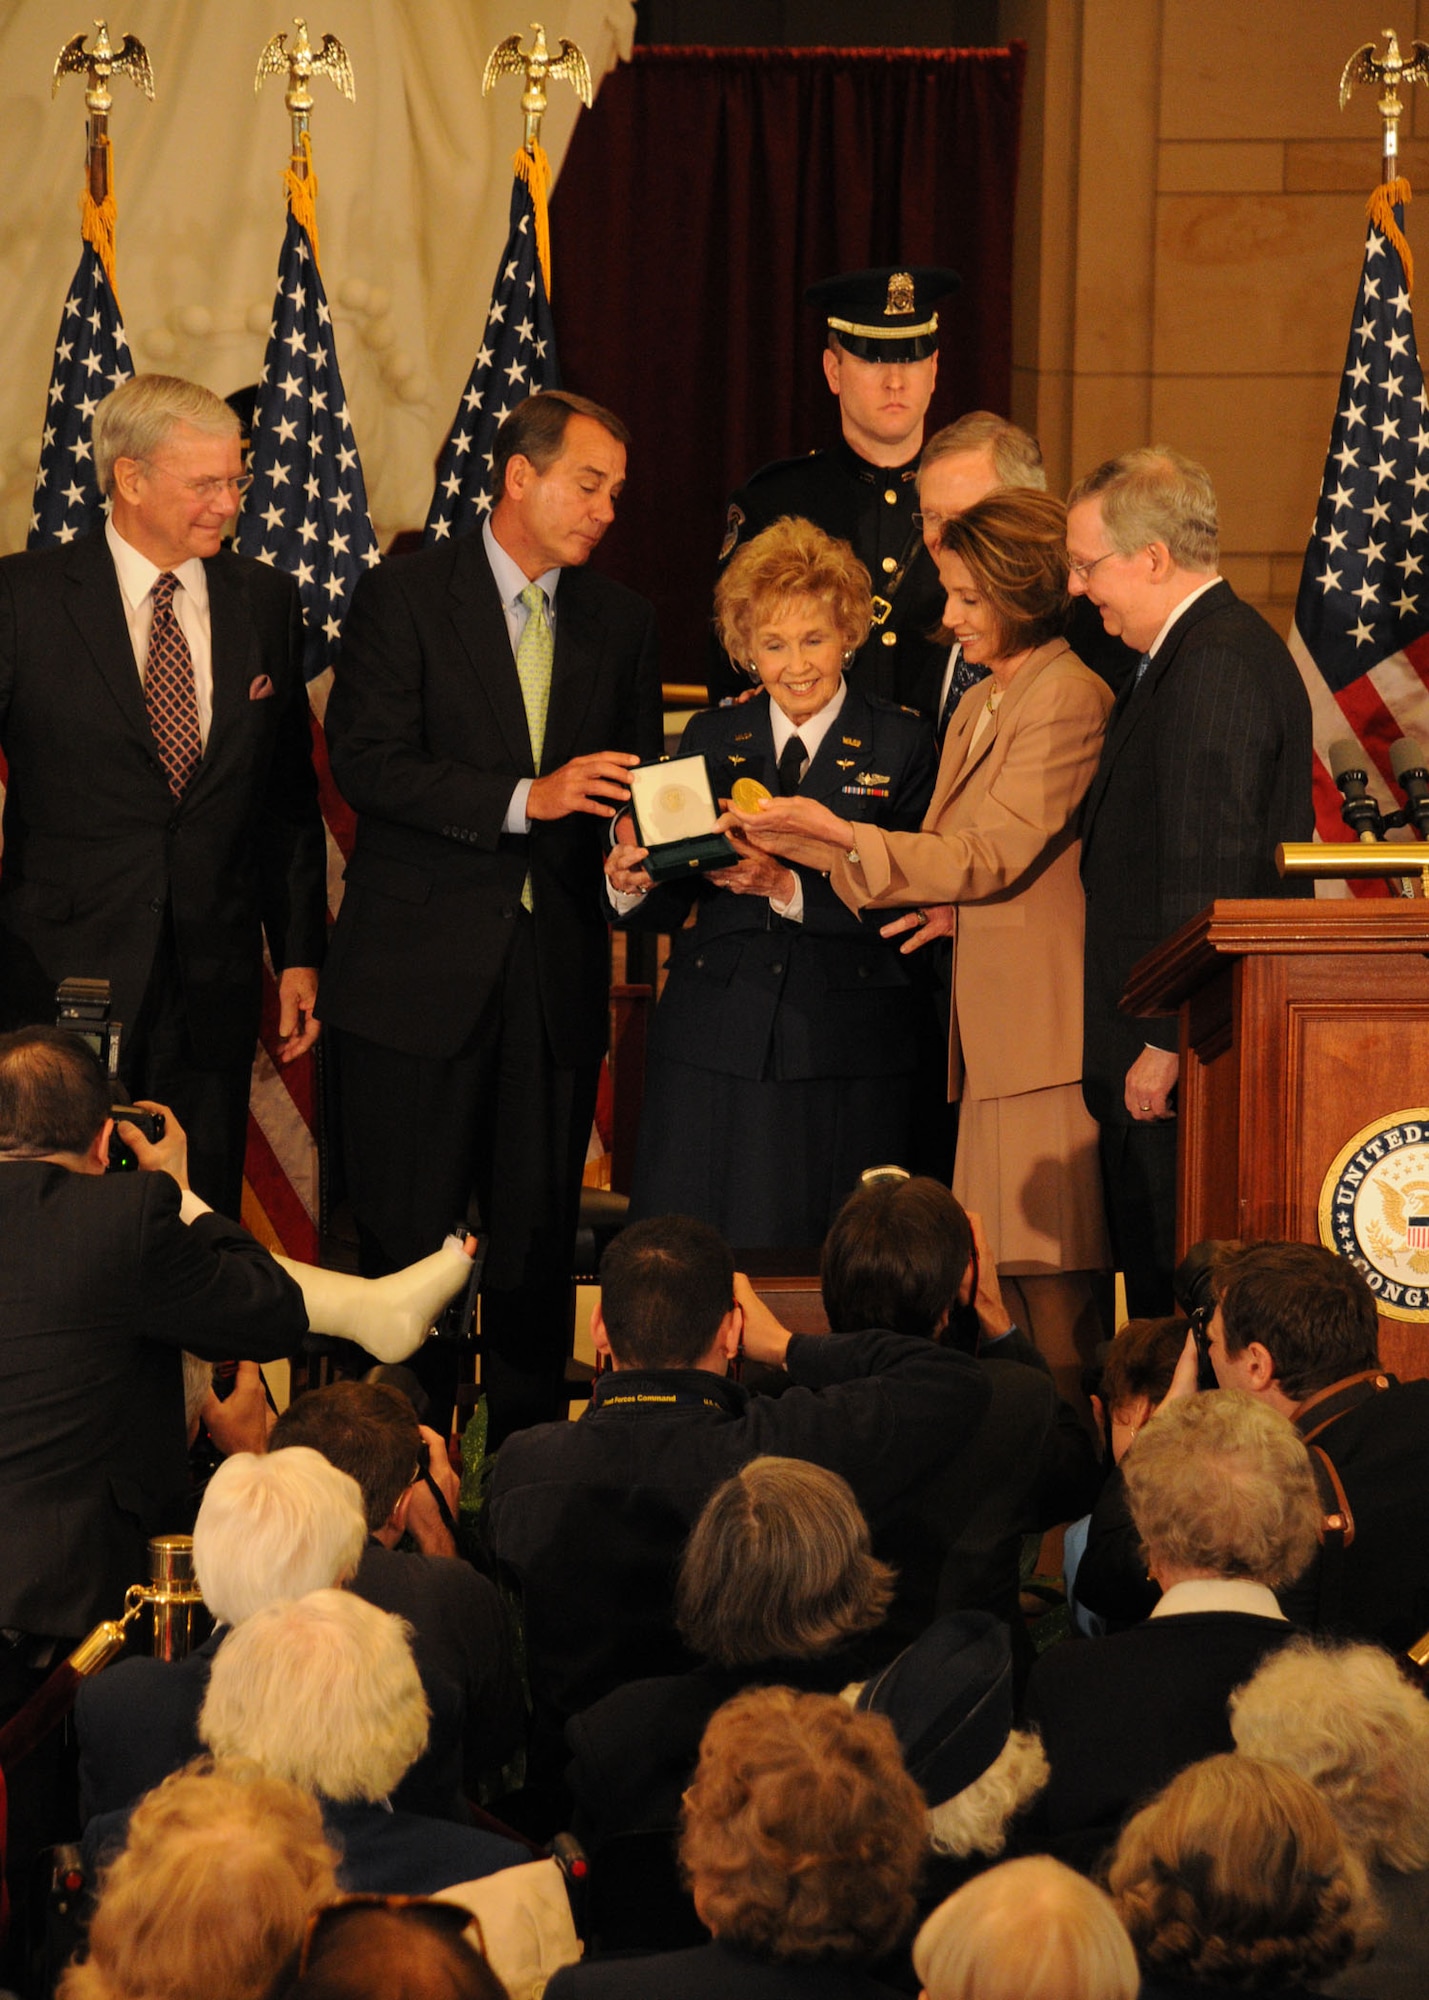 Deanie Parrish, Woman Airforce Service Pilot, center, accepts the Congressional Gold Medal on behalf of her fellow WASP, more than 170 of which assembled below to watch, during a ceremony recognizing the female aviators for their service during World War II at the Capitol building in Washington D.C. March 10, 2010. A number of Joint Team Andrews Airmen volunteered to escort the WASP and presented each of them with their Congressional Gold Medal in a private ceremony. The medal used during the presentation was donated to the Smithsonian Institution as a historic and educational piece. (U.S. Air Force photo by Airman 1st Class Kat Lynn Justen)